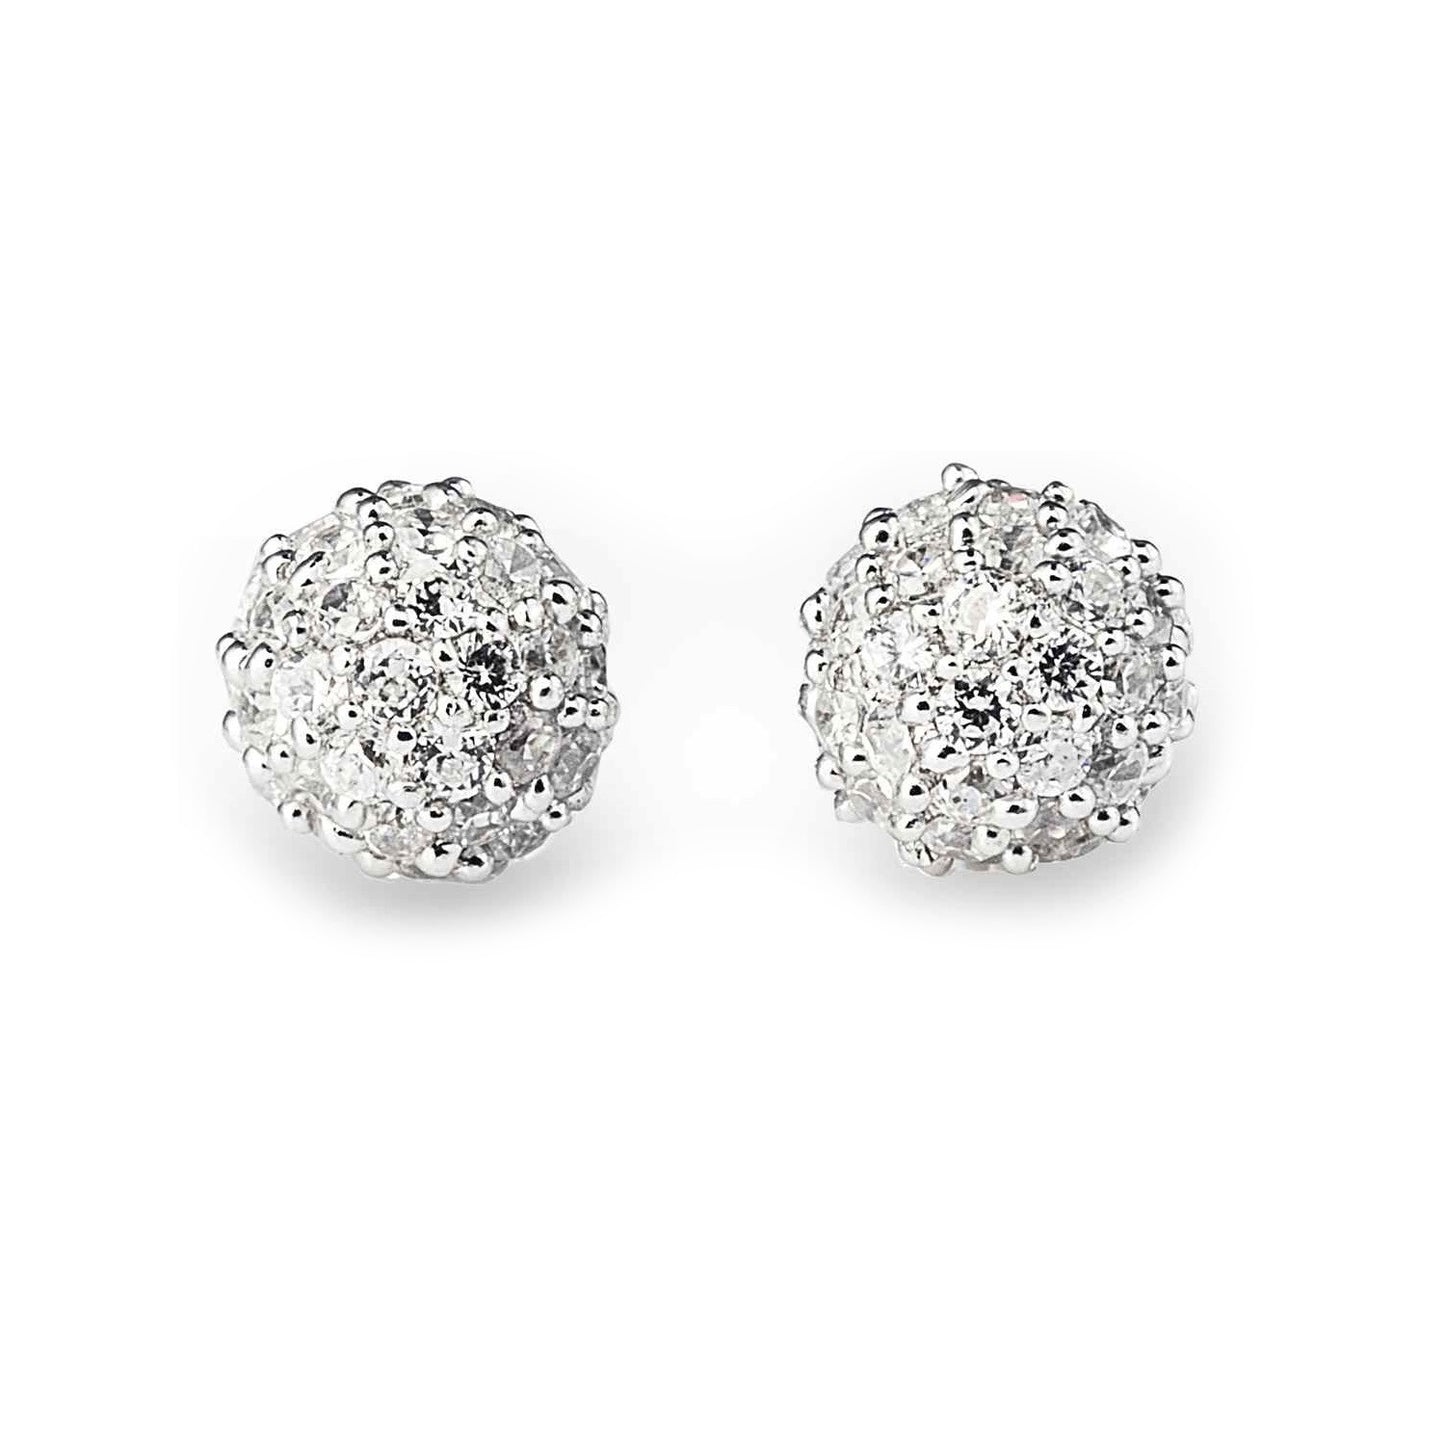 Bella Gala Ball Stud Earrings in 925 Sterling Silver with Cubic Zirconia Stones. Worldwide Shipping + Free Shipping Australia wide ($150+). Affordable luxury jewellery by Bellagio & Co.